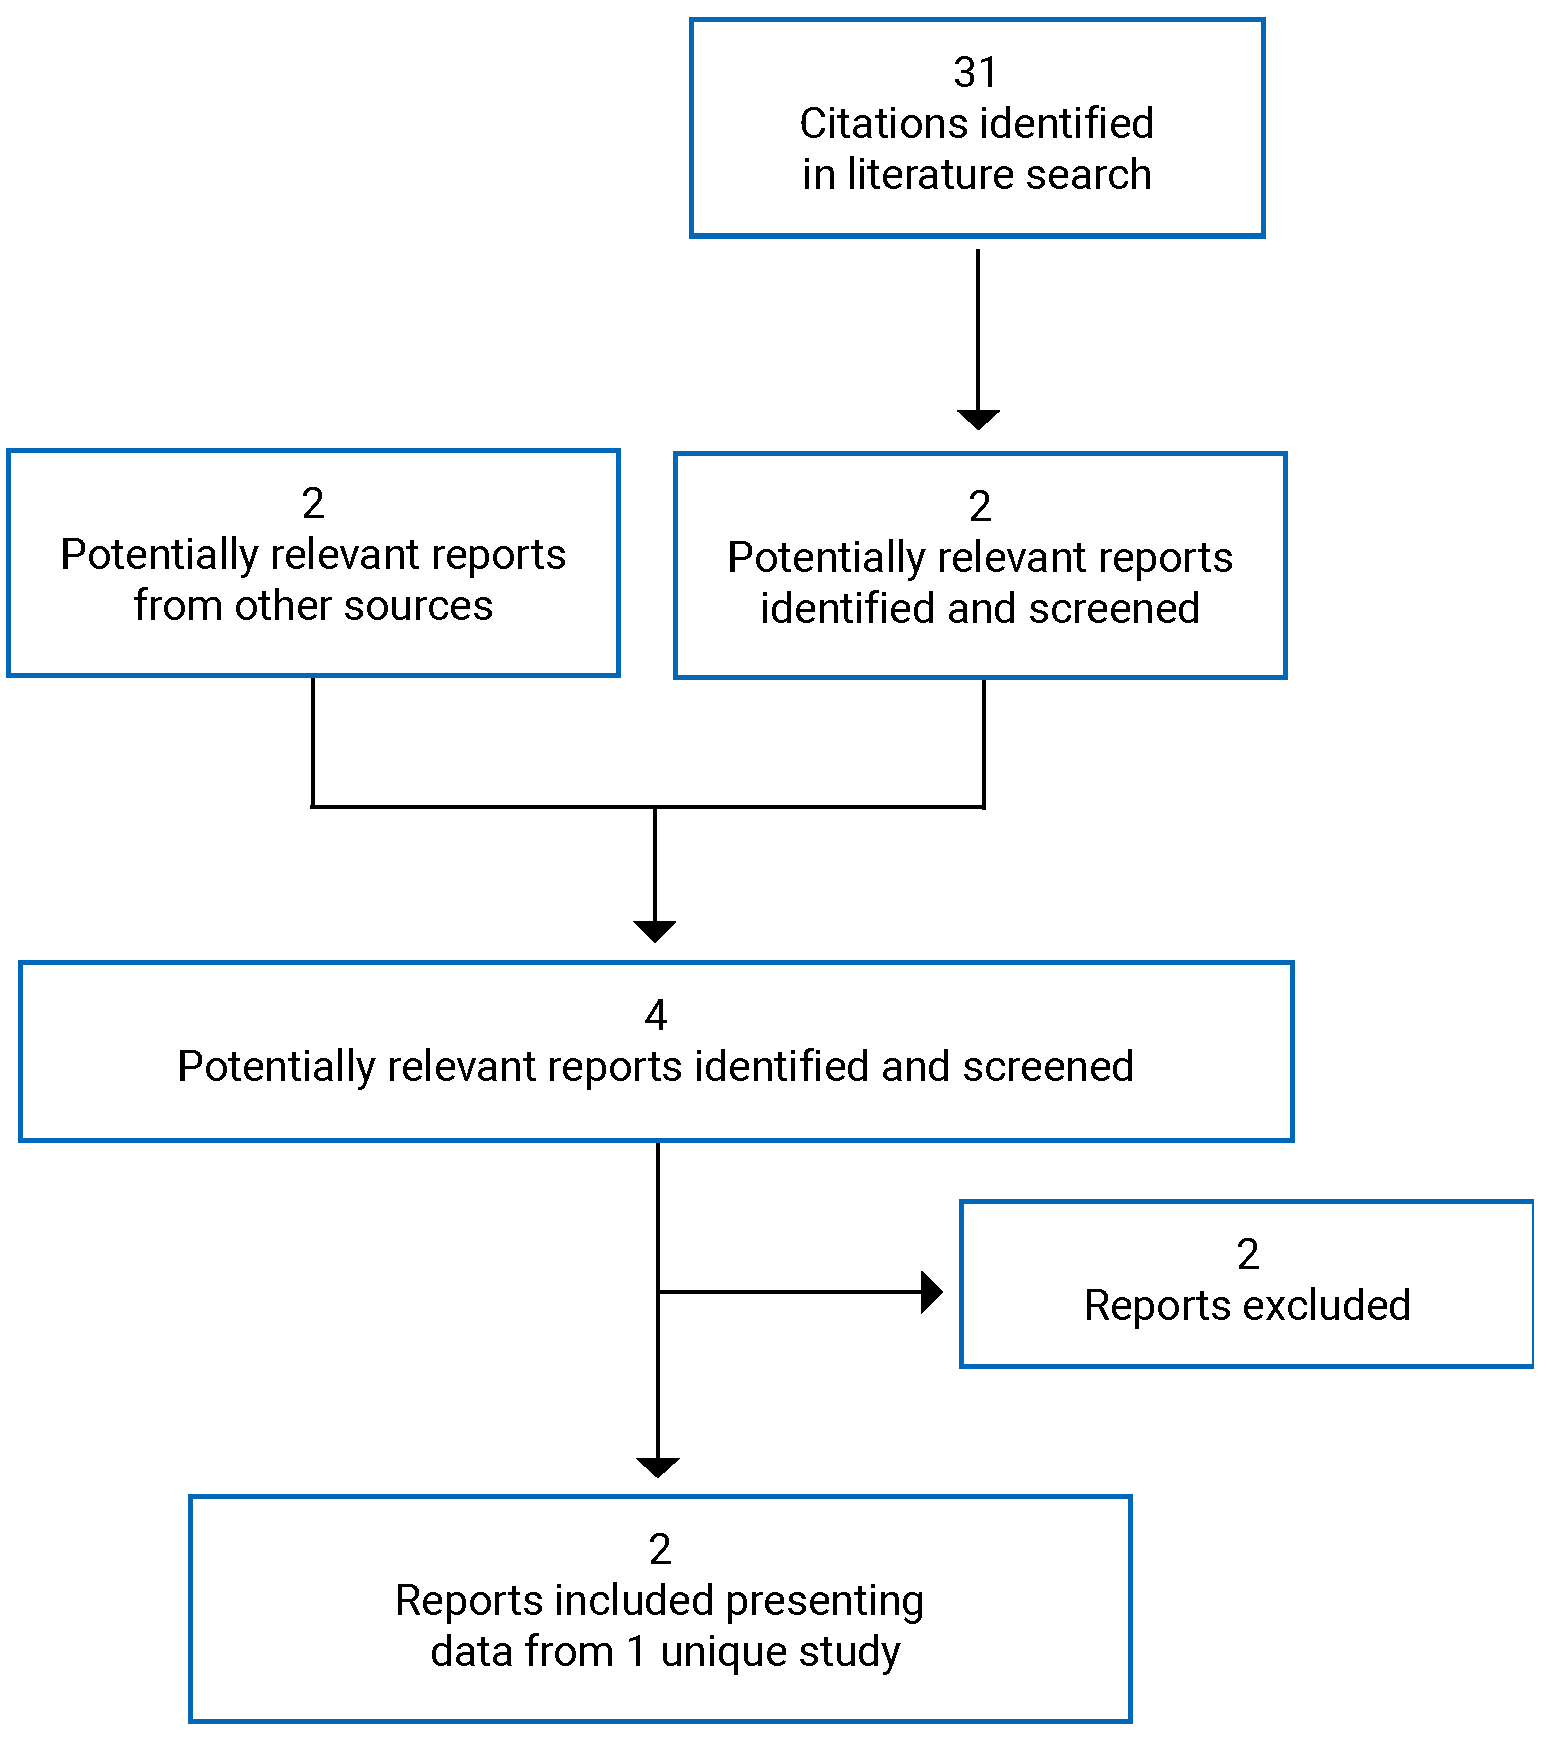 A total of 31 citations were identified in the literature search, of which 2 were considered potentially relevant reports; and 23 potentially relevant reports were identified from other sources. Of these, 3 full-text reports were retrieved for scrutiny. In total, 1 report of 1 study was included in the CADTH review.